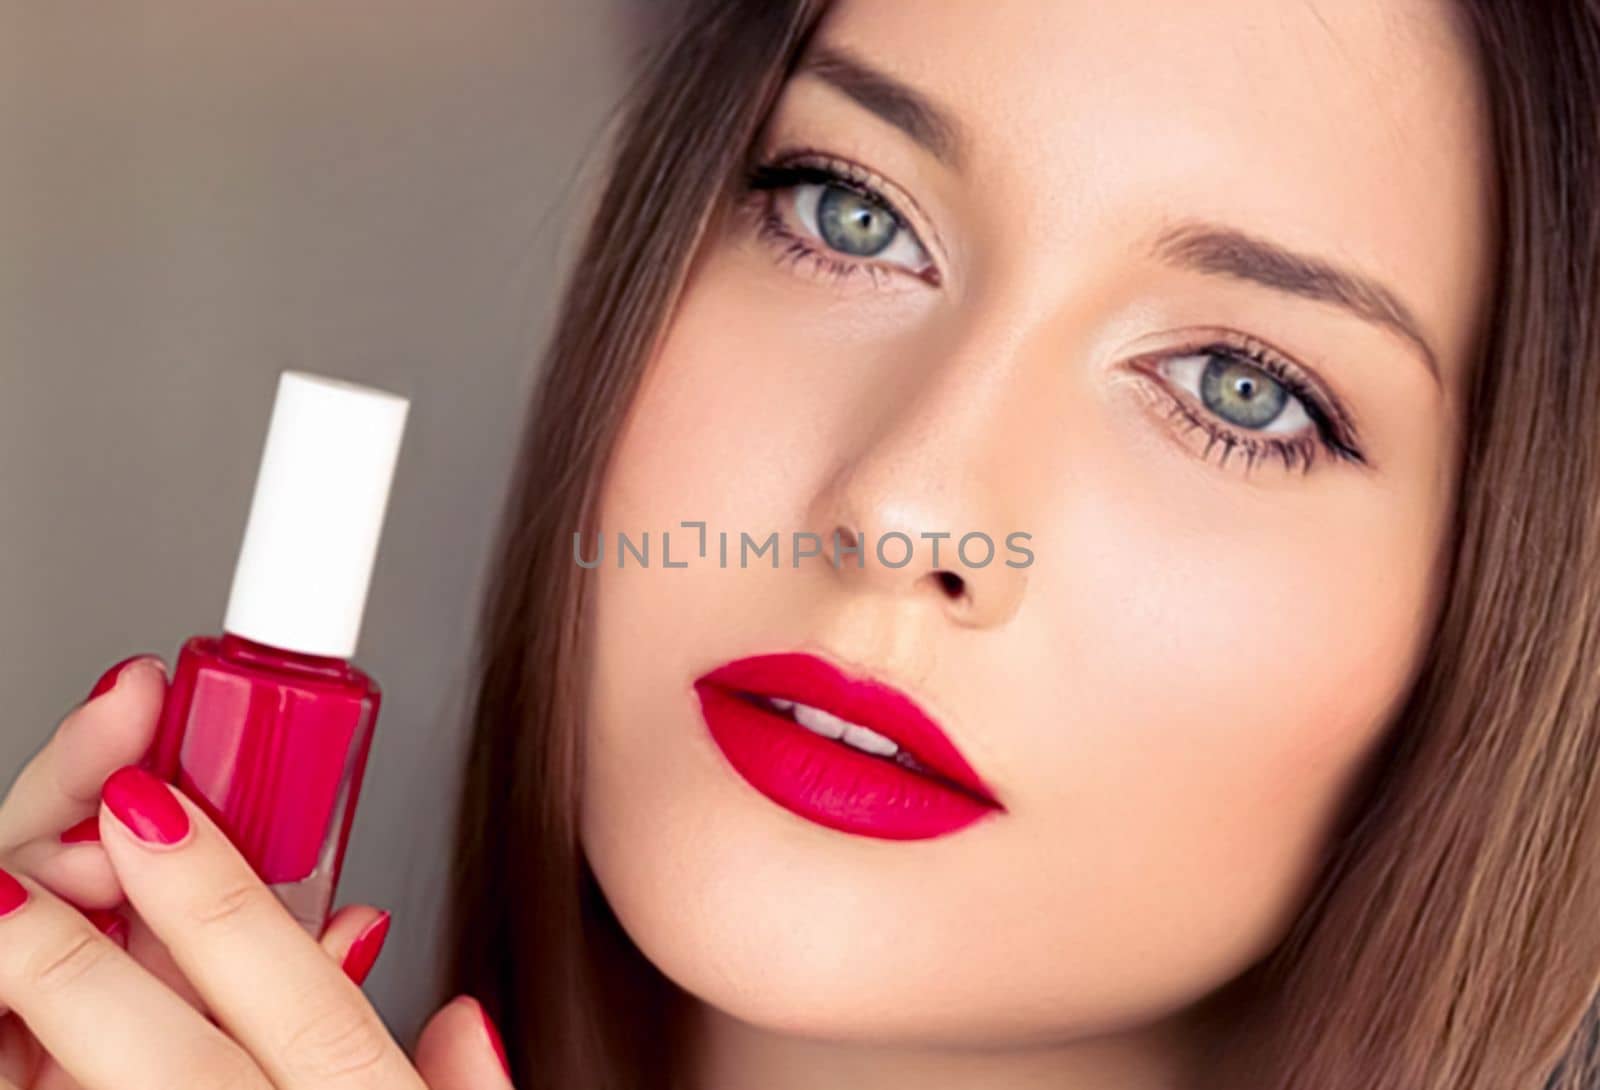 Beauty product, makeup and cosmetics, face portrait of beautiful woman with nail polish, manicure and matching red lipstick make-up for luxury cosmetic, style and fashion by Anneleven